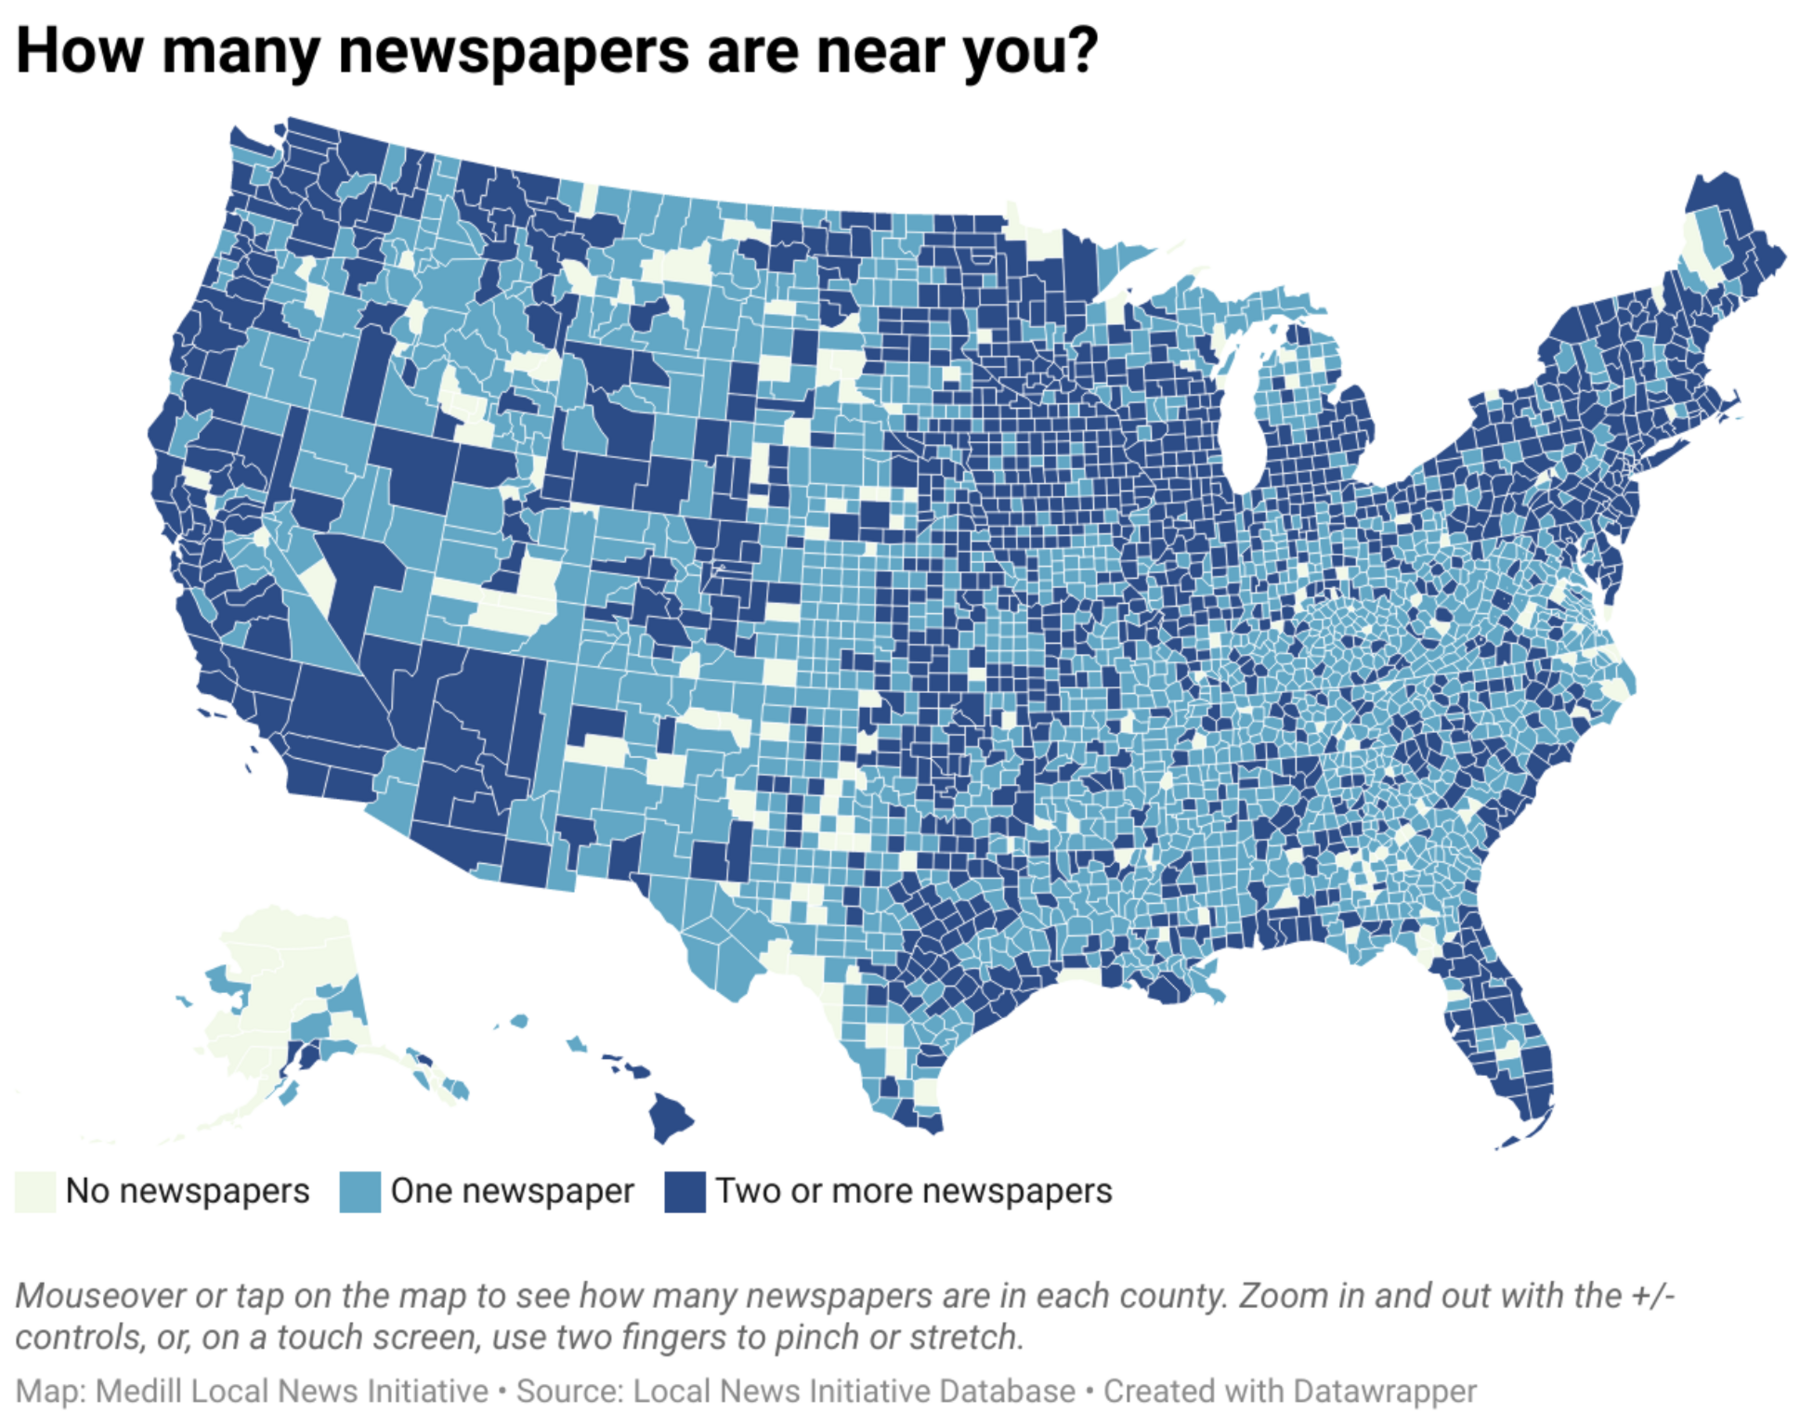 Data visualization of newspaper count in United States counties. Full description in caption.